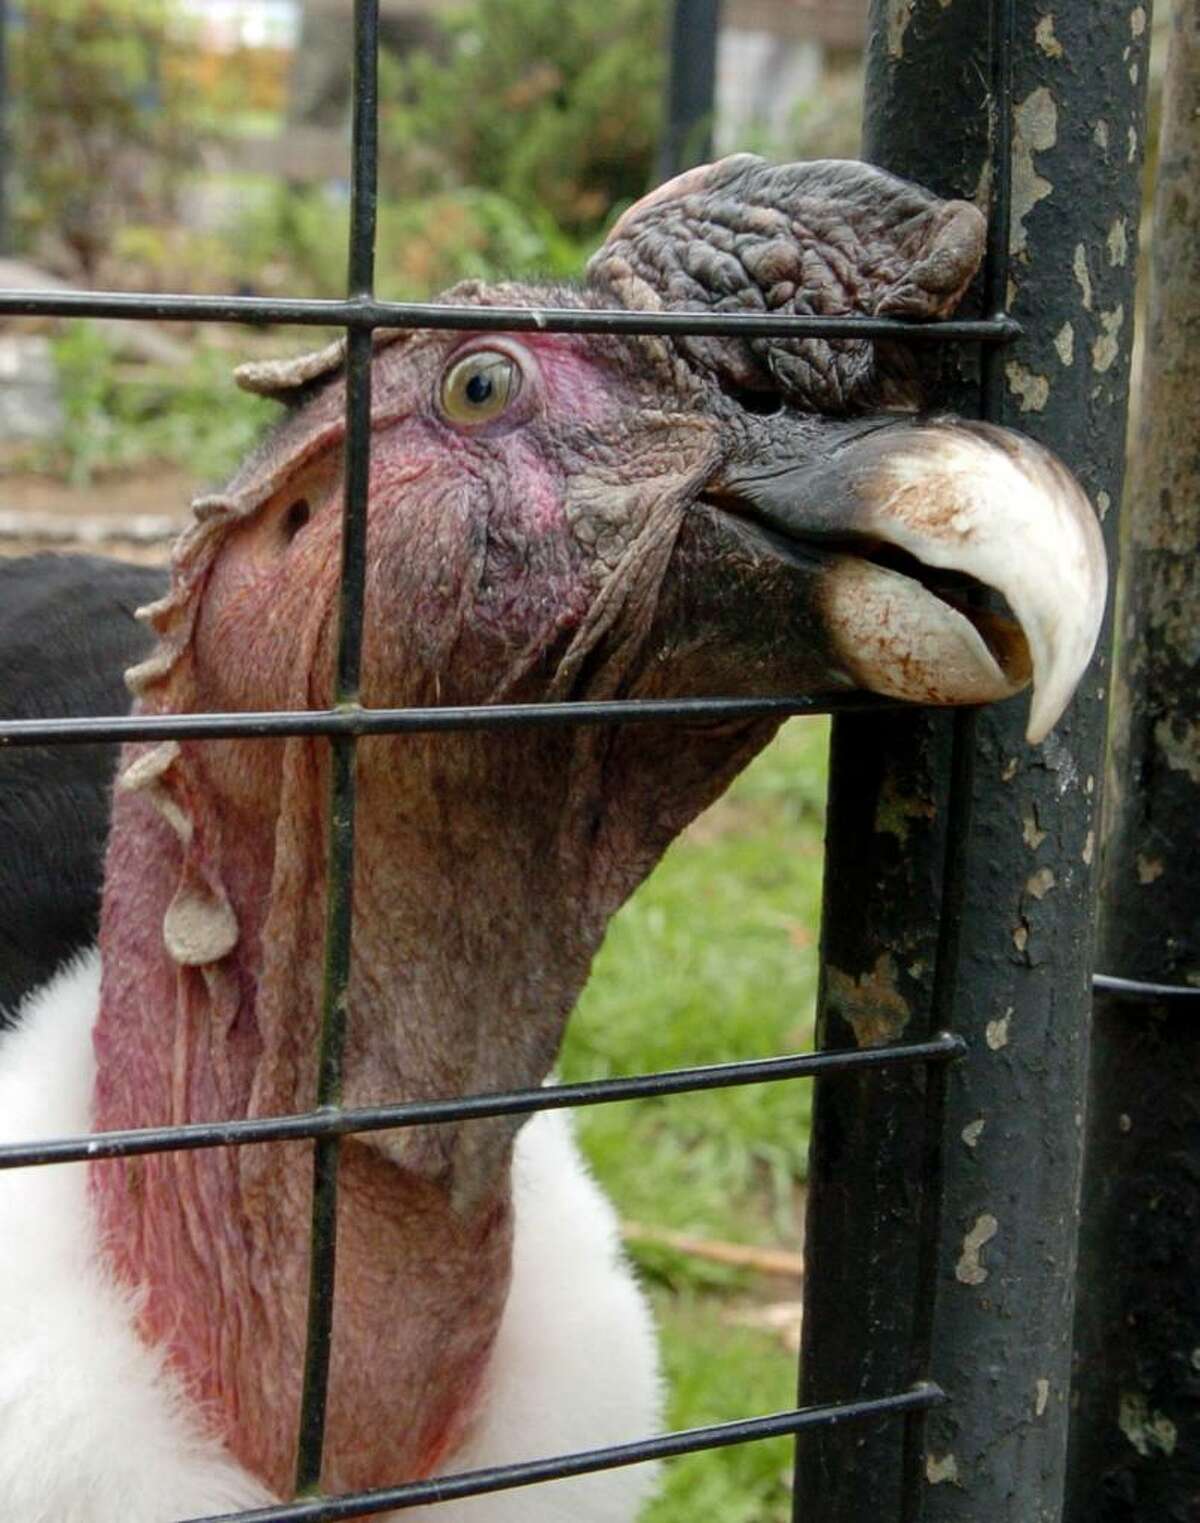 Thaao, the Andean condor who lived at Connecticut's Beardsley Zoo, in Bridgeport, Conn., seen here in 2005, passed away on Jan. 6th. At 80, Thaao was believed to be the oldest condor in captivity in the world.